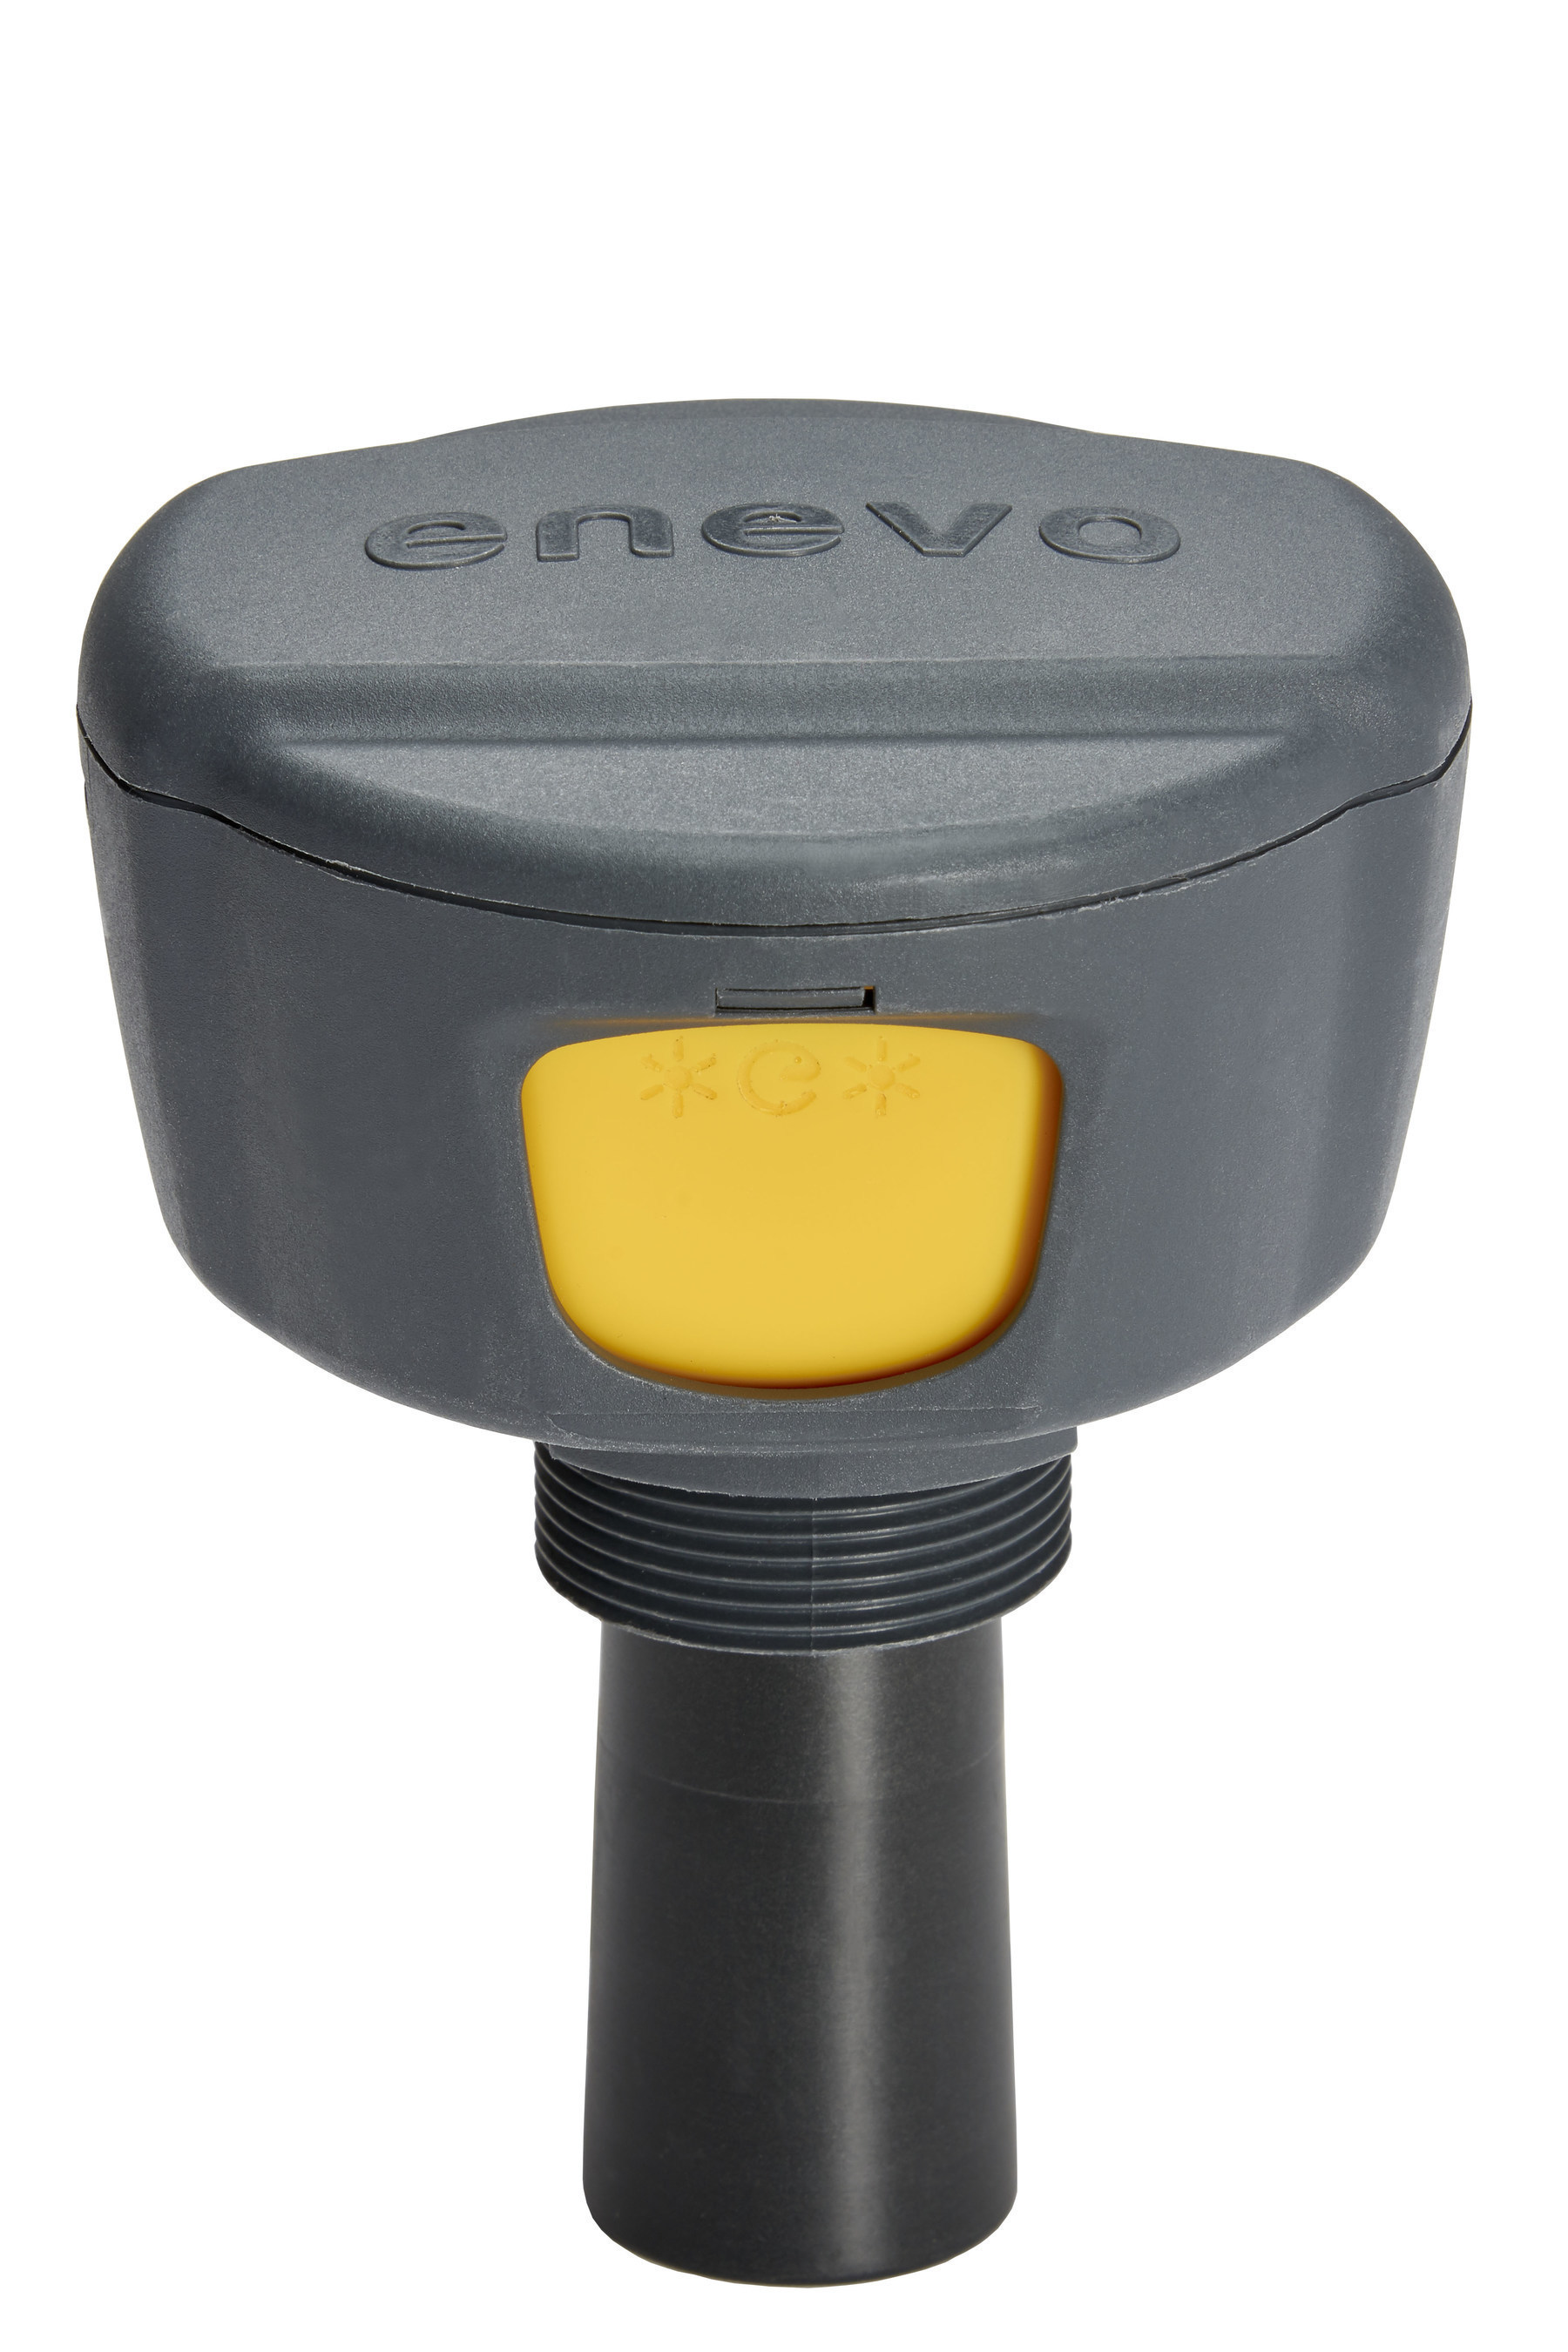 Husky's partnership with Enevo allows offers customers the WE-008L sensor - a tank level sensor that is designed and constructed to accurately measure tank fill levels in harsh environmental conditions.